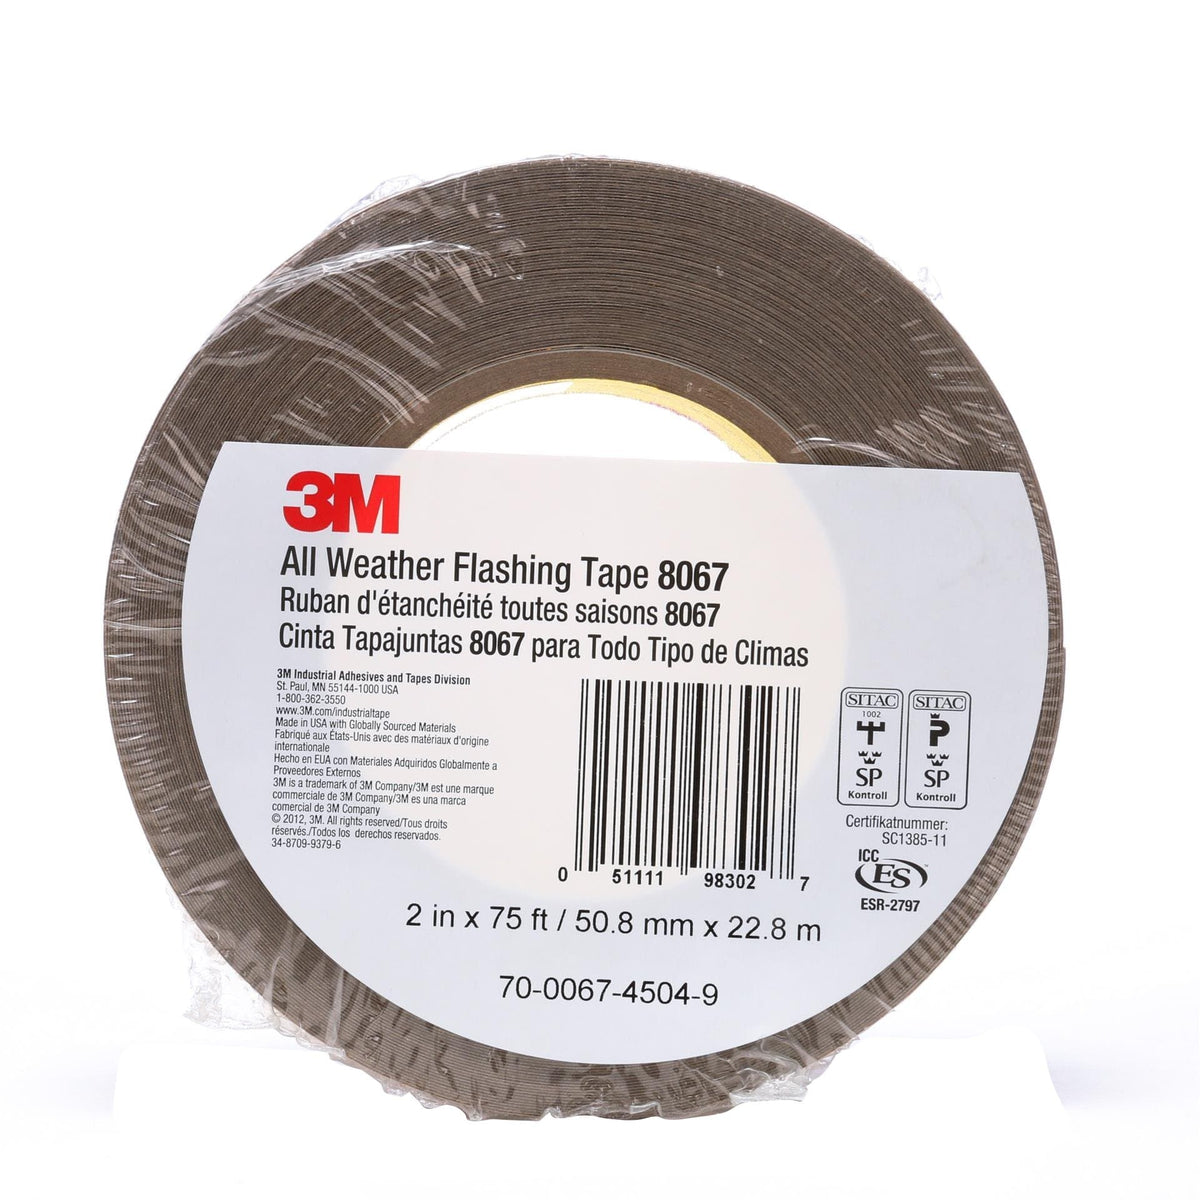 3M Marine Qualifies for Free Shipping 3M All Weather Flashing Tape 8067 Tan 2" 75' Slit Liner #7000049773